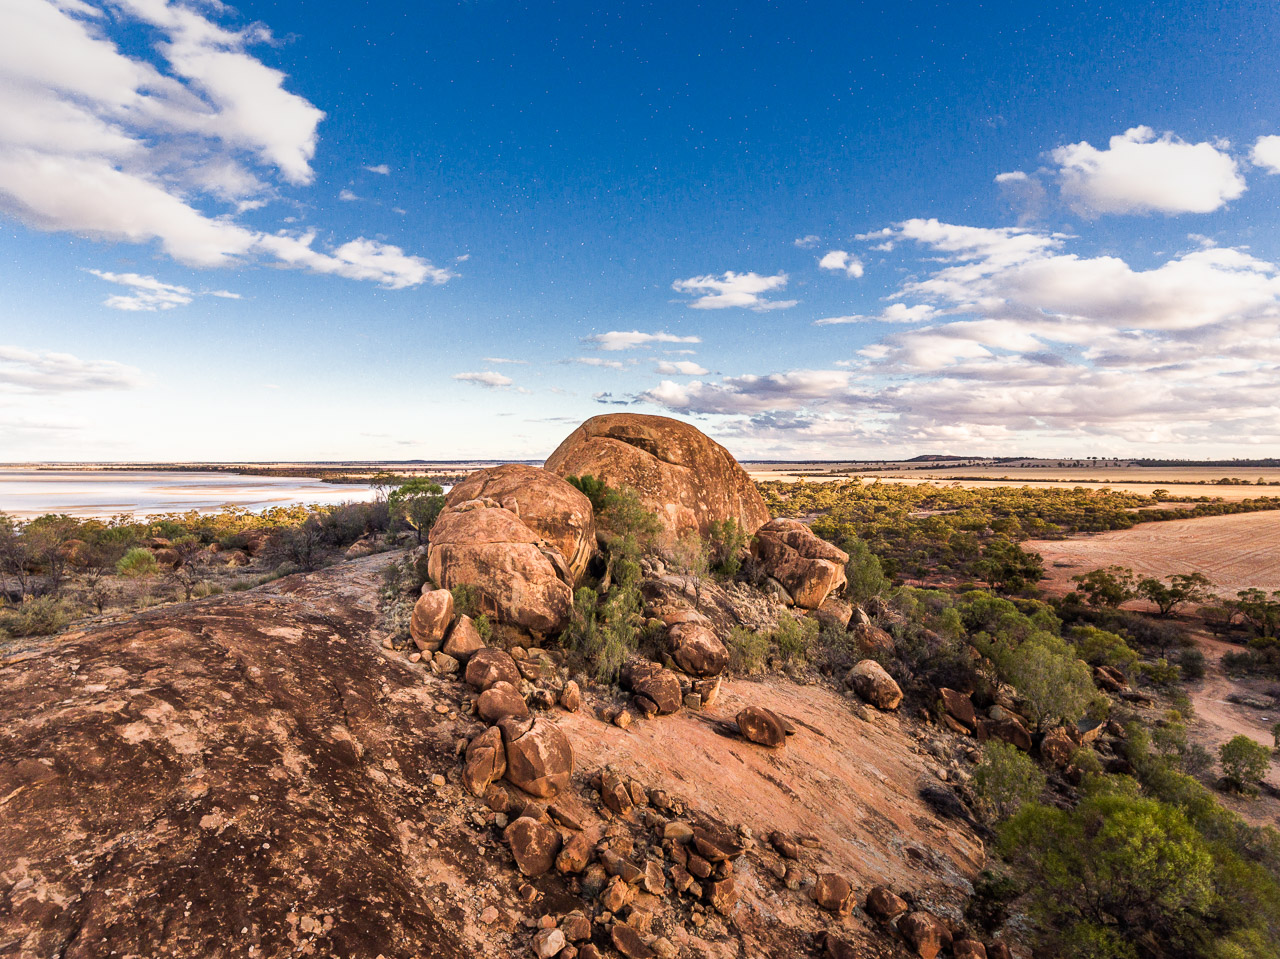 Drone image of Eaglestone Rock, also known as Turtle Rock, and Lake Brown salt lake